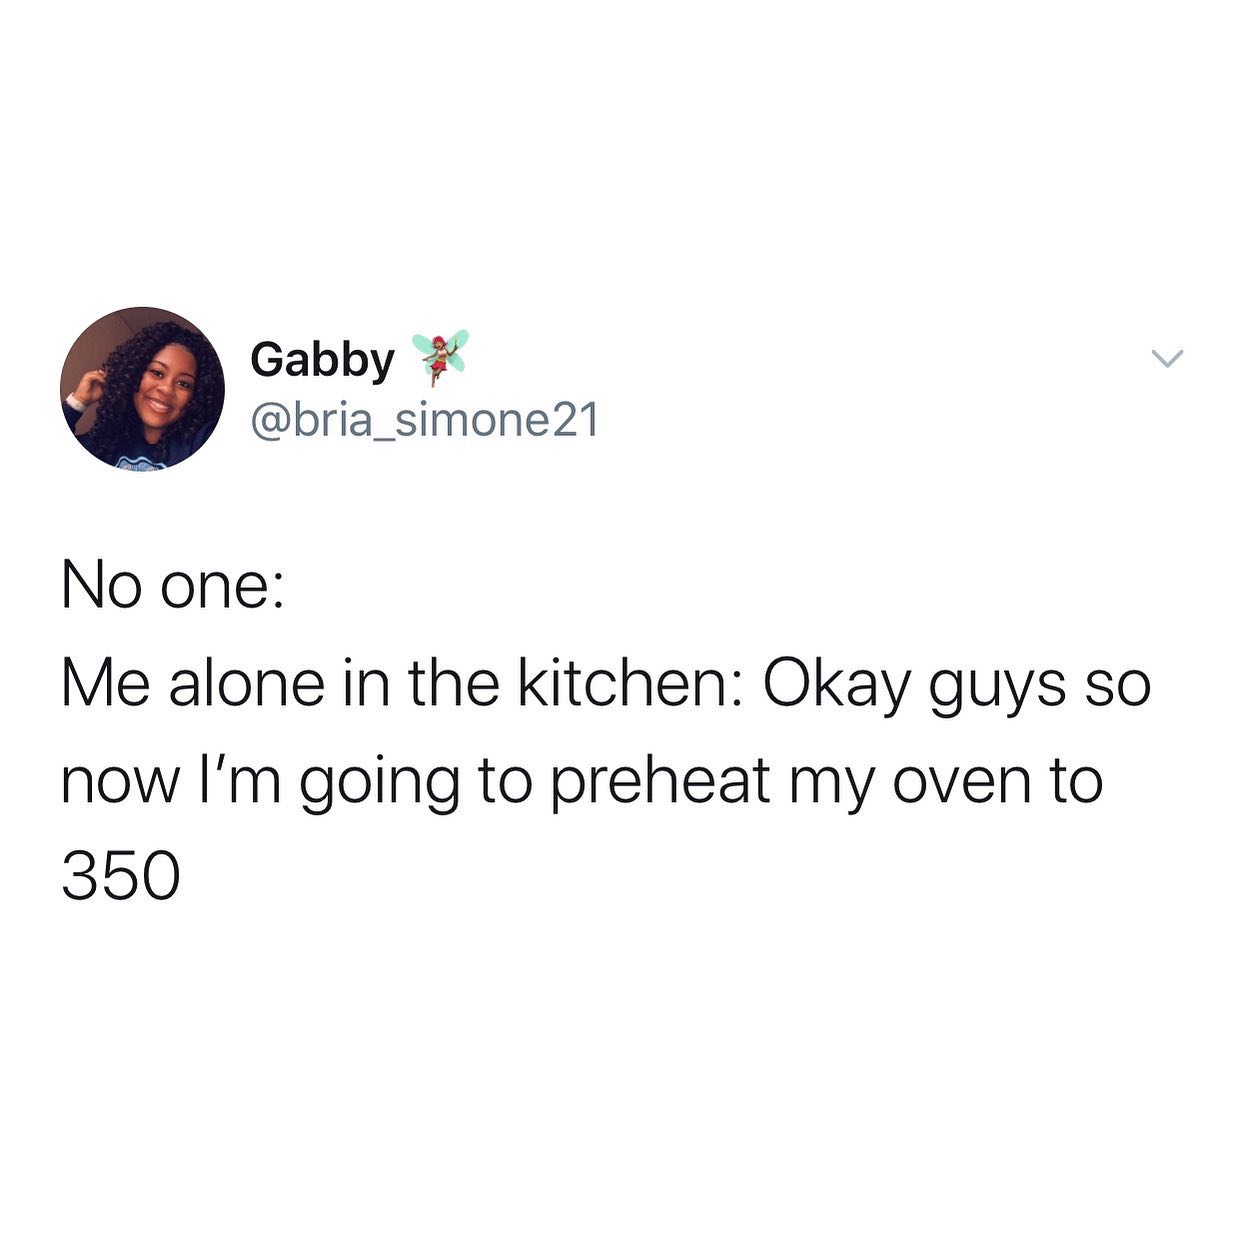 dank memes - twitter - no one literally no one - Gabby No one Me alone in the kitchen Okay guys so now I'm going to preheat my oven to 350